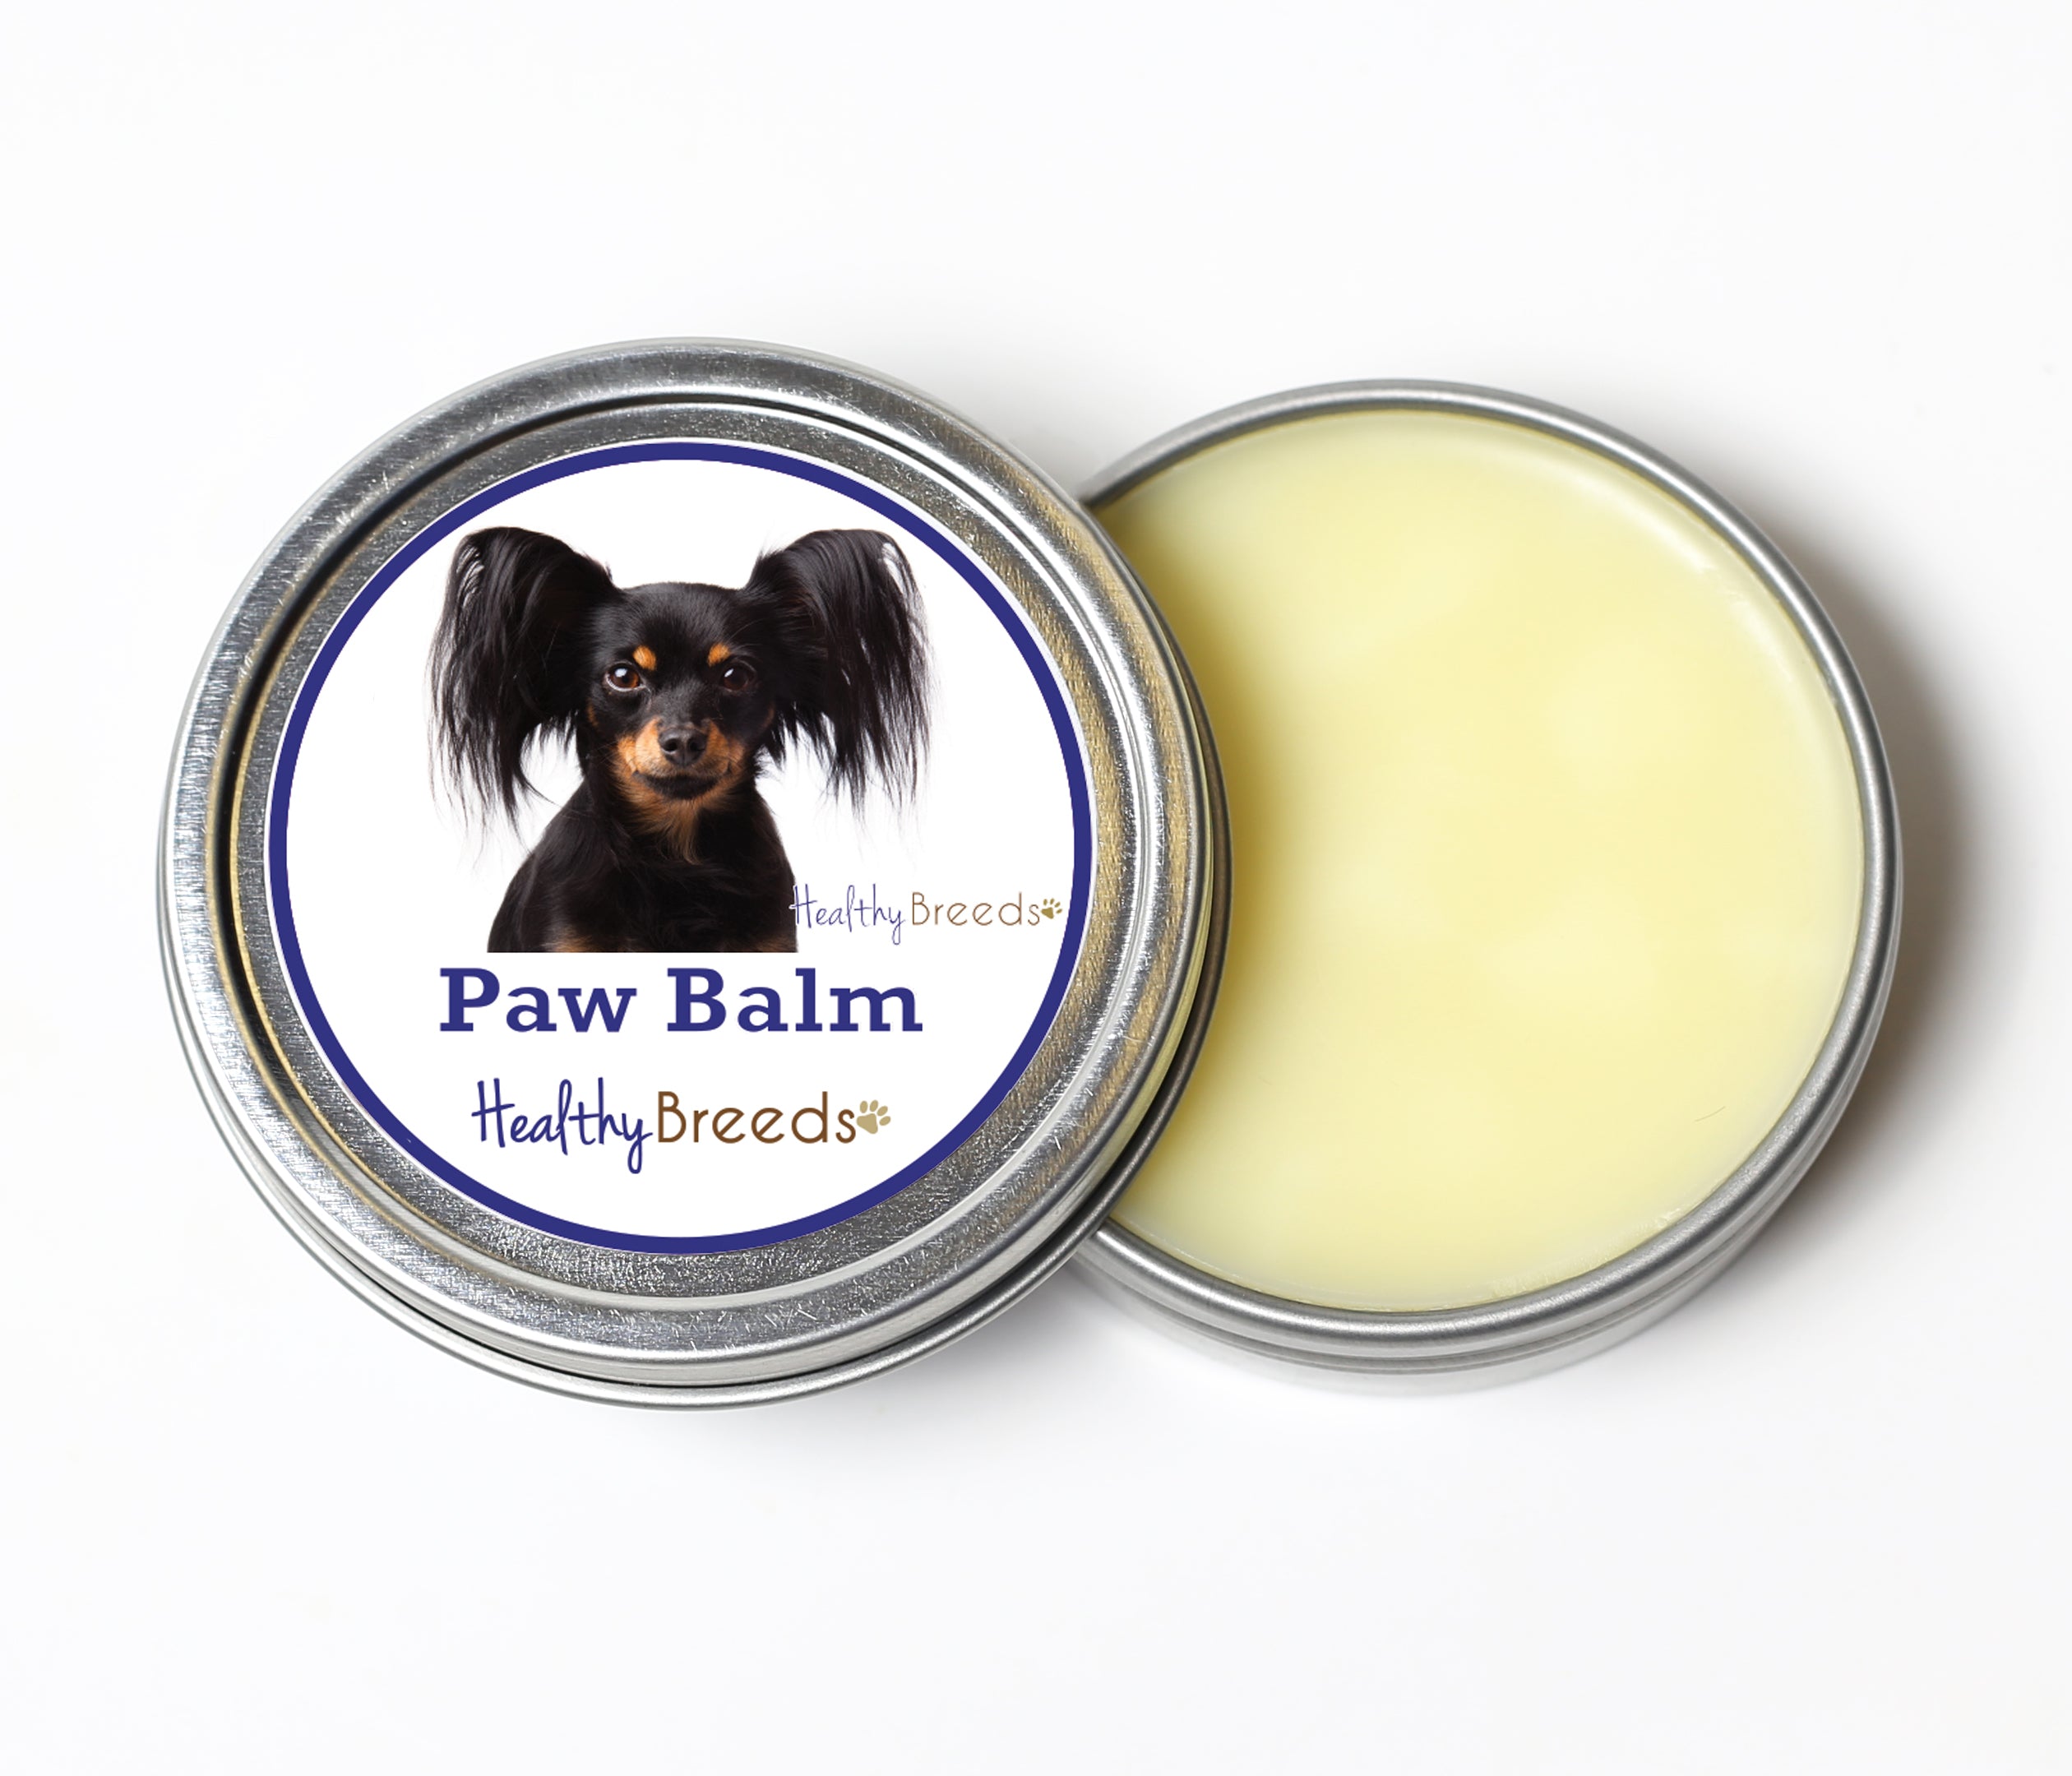 Russian Toy Terrier Dog Paw Balm 2 oz